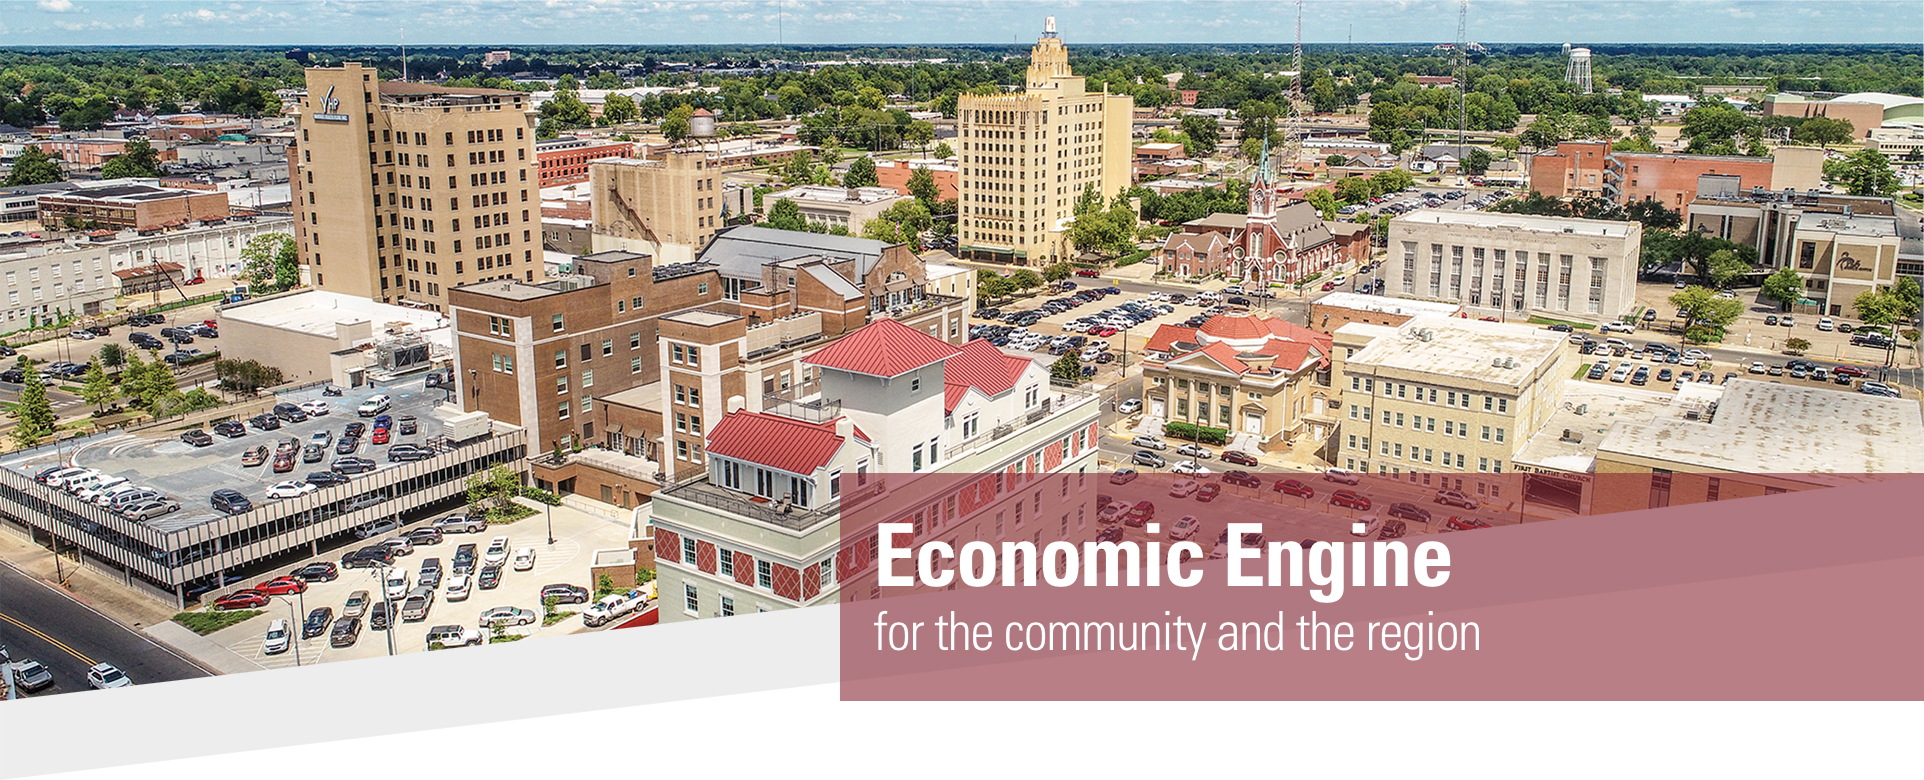 Economic Engine for the community and the region